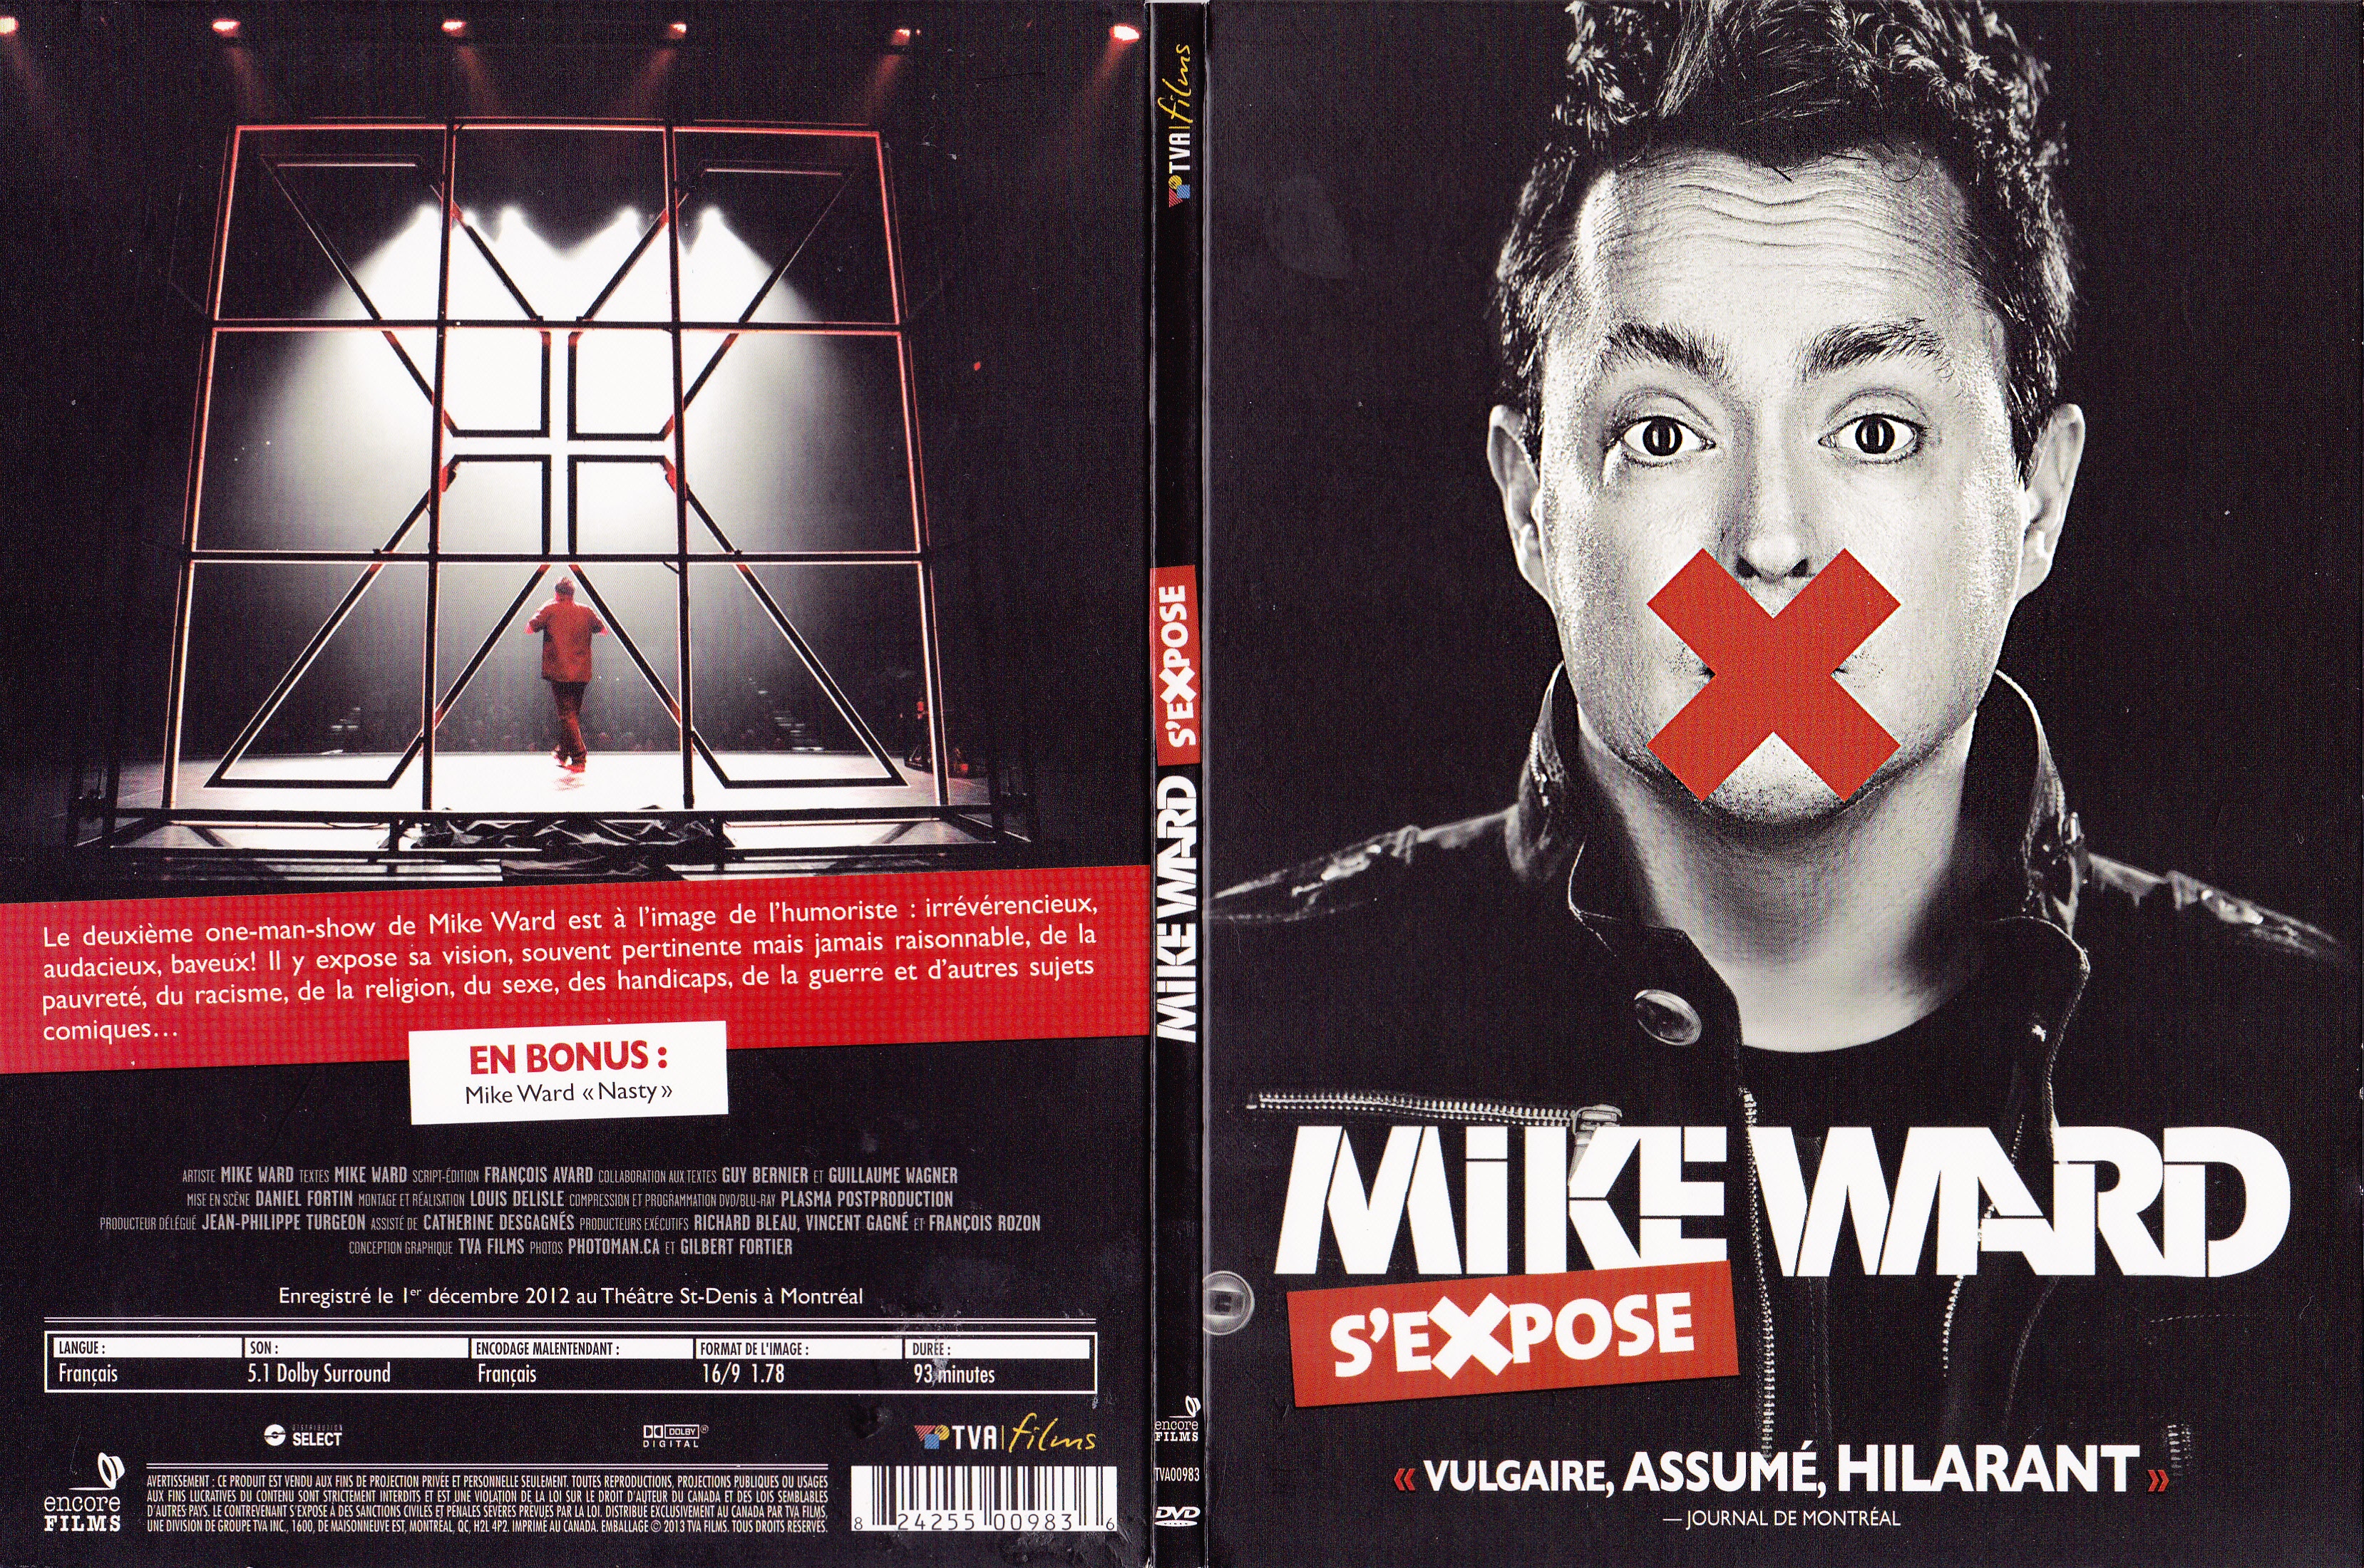 Jaquette DVD Mike Ward - S